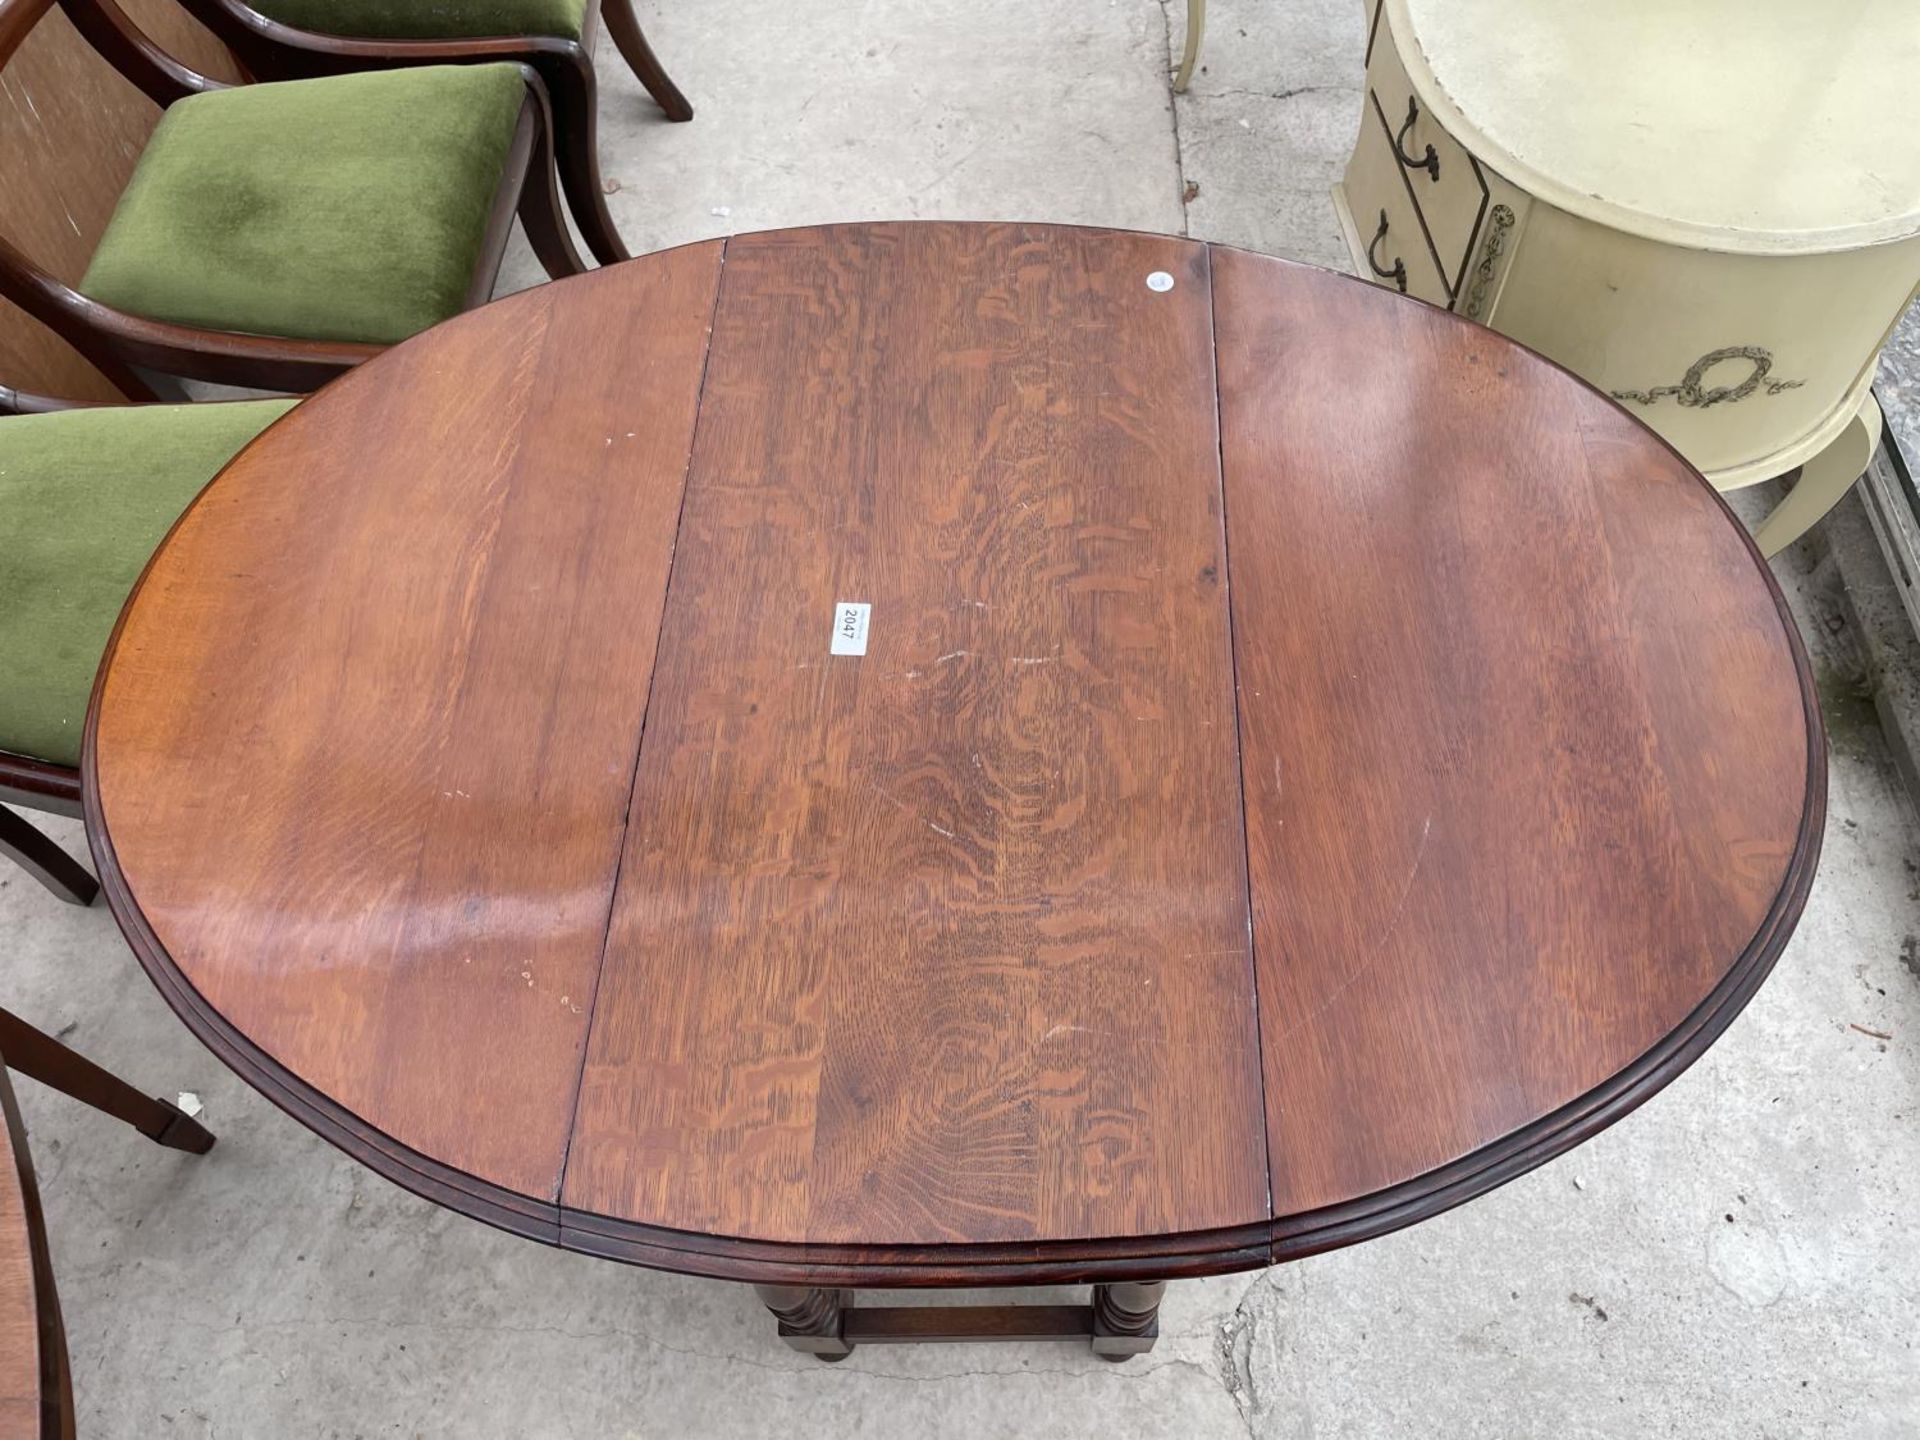 AN EARLY 20TH CENTURY OVAL OAK DINING TABLE ON TURNED LEGS, 30X42" - Image 2 of 5